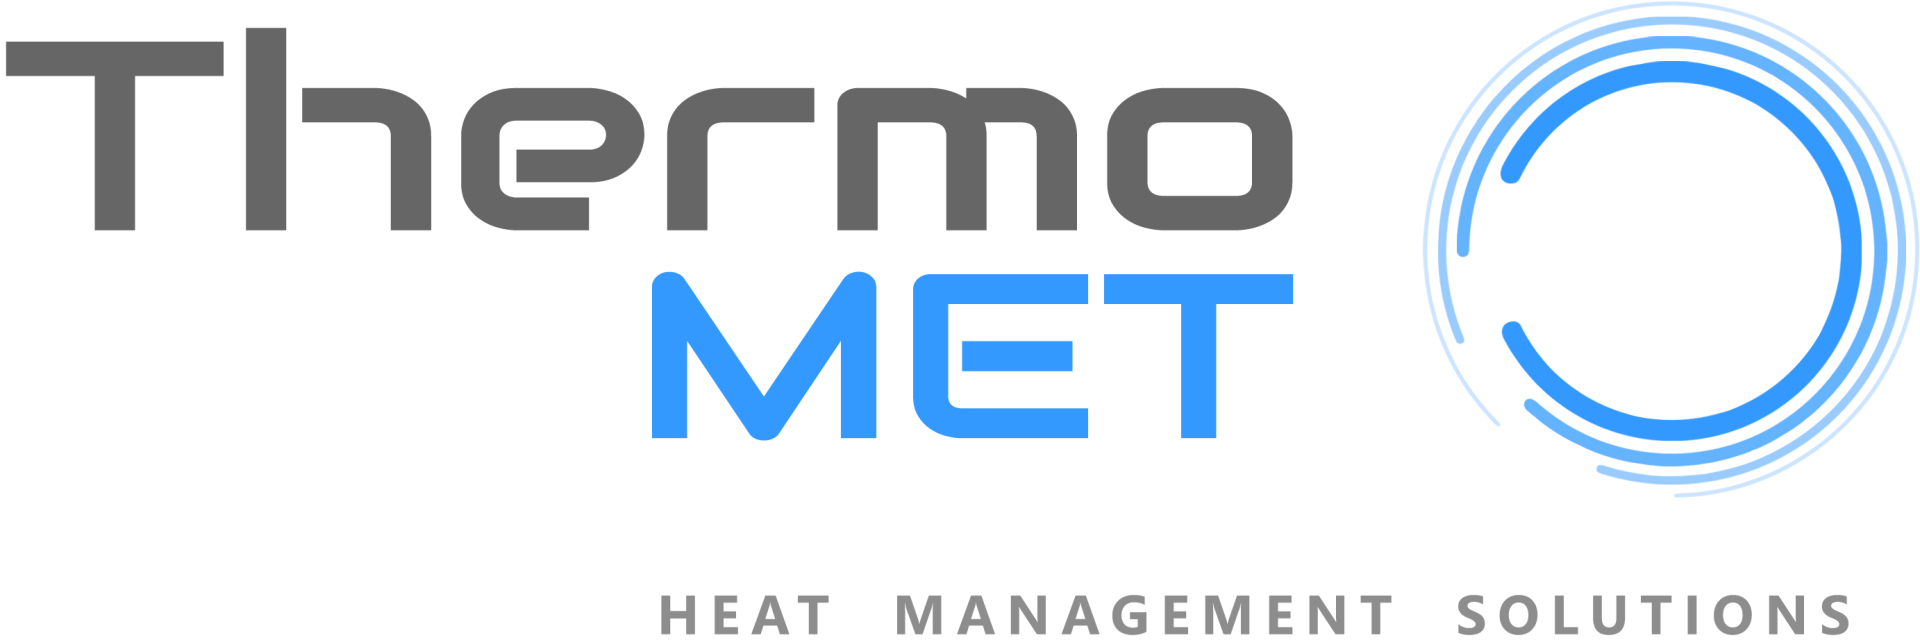 thermo met